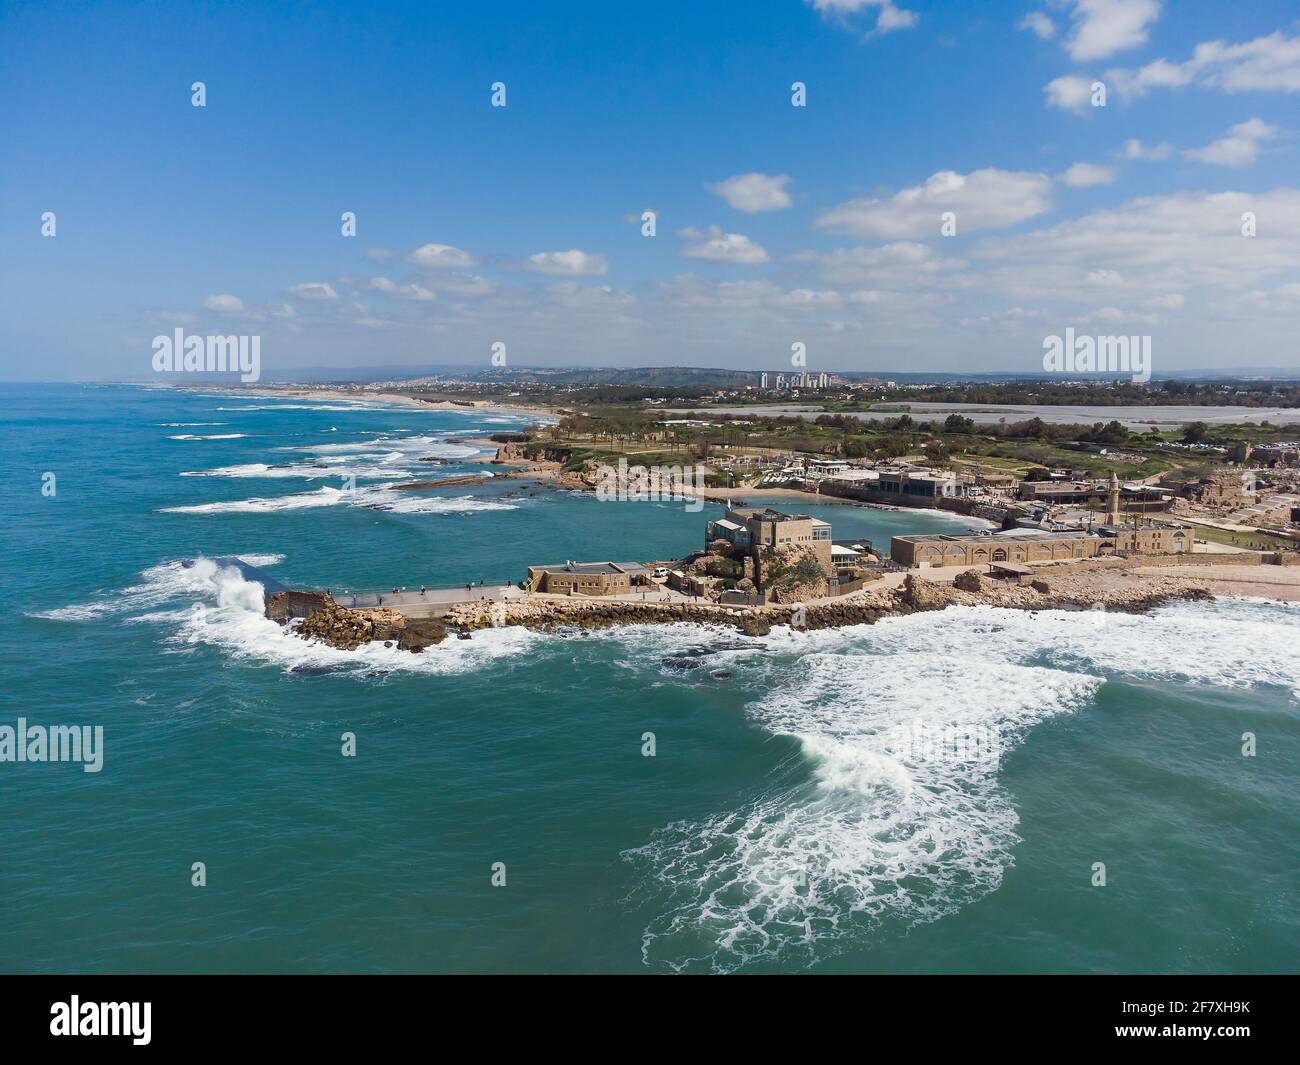 coast of the ancient city of Caesarea Israel Aerial photography Stock Photo